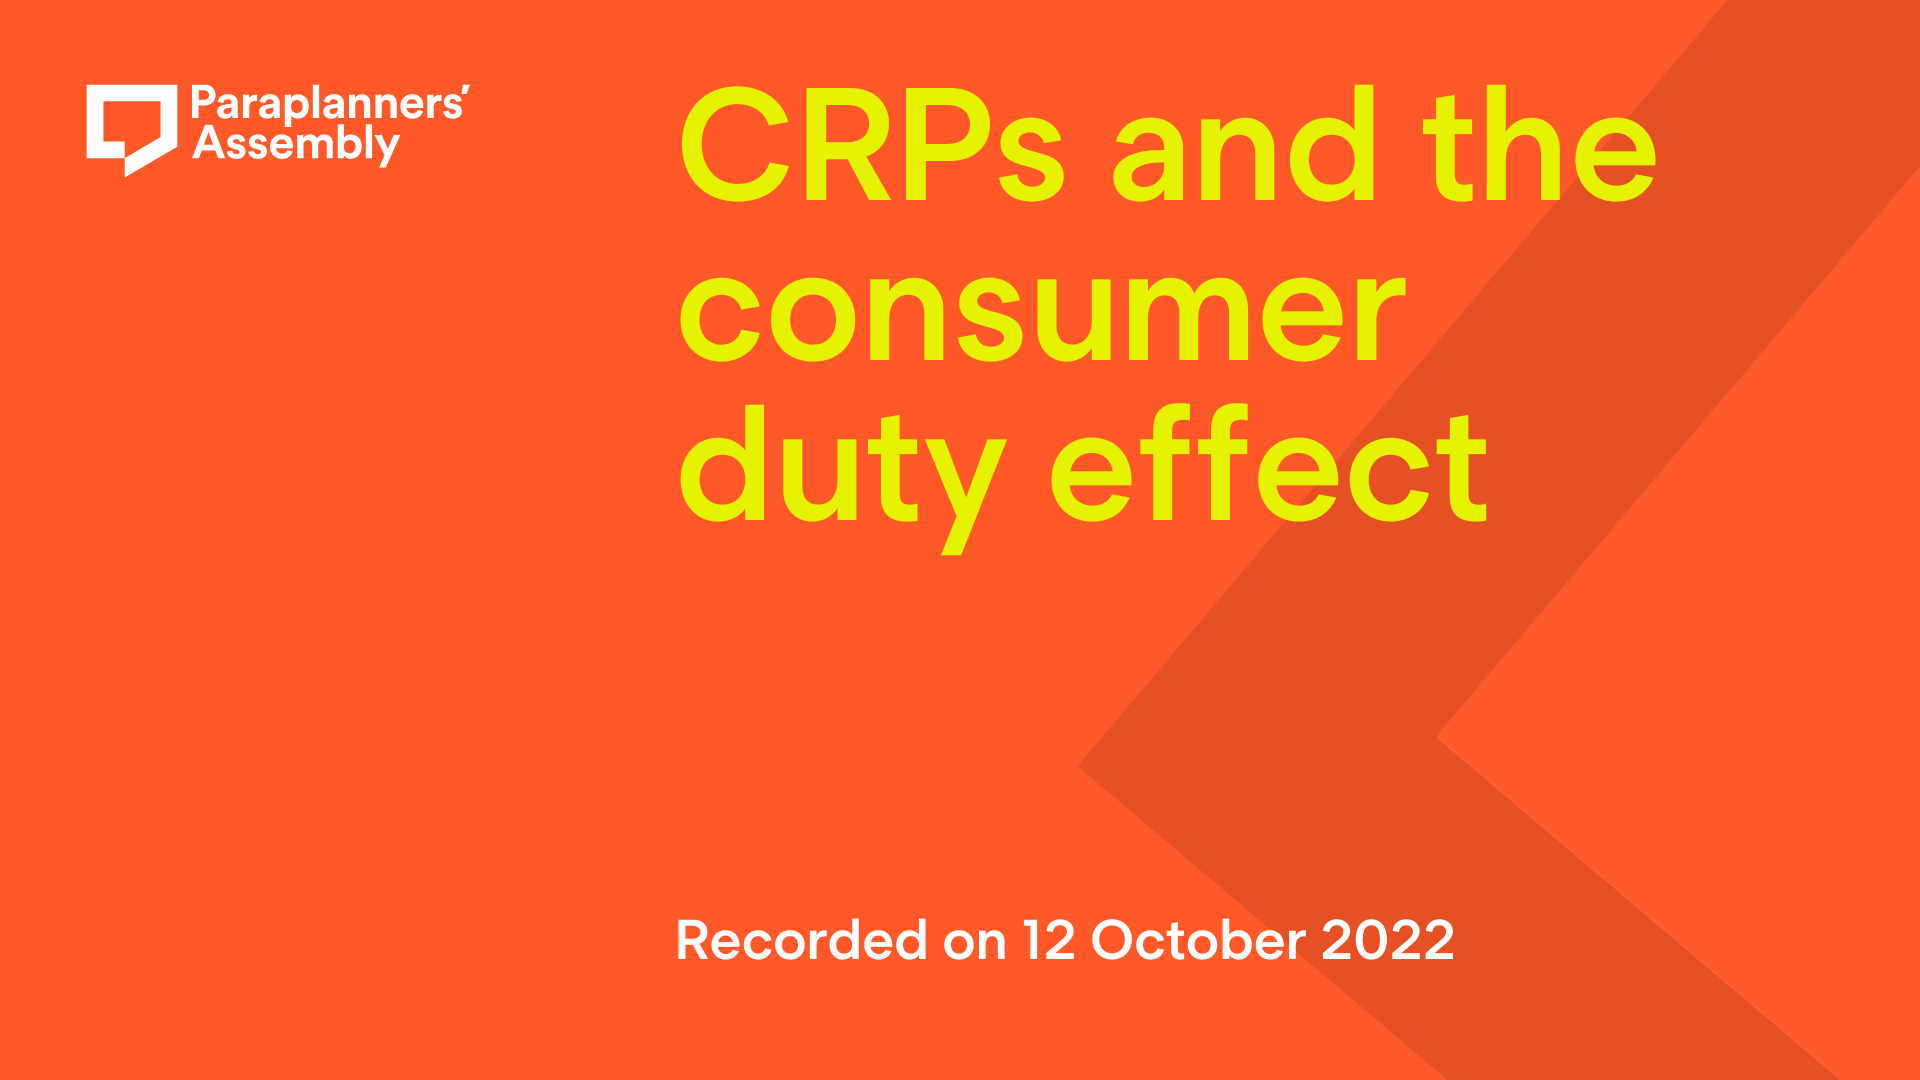 A video cover image showing the title 'CRPs and the consumer duty effect' in large letters. Beneath it, the subtitle reads 'Recorded on 12 October 2022'.